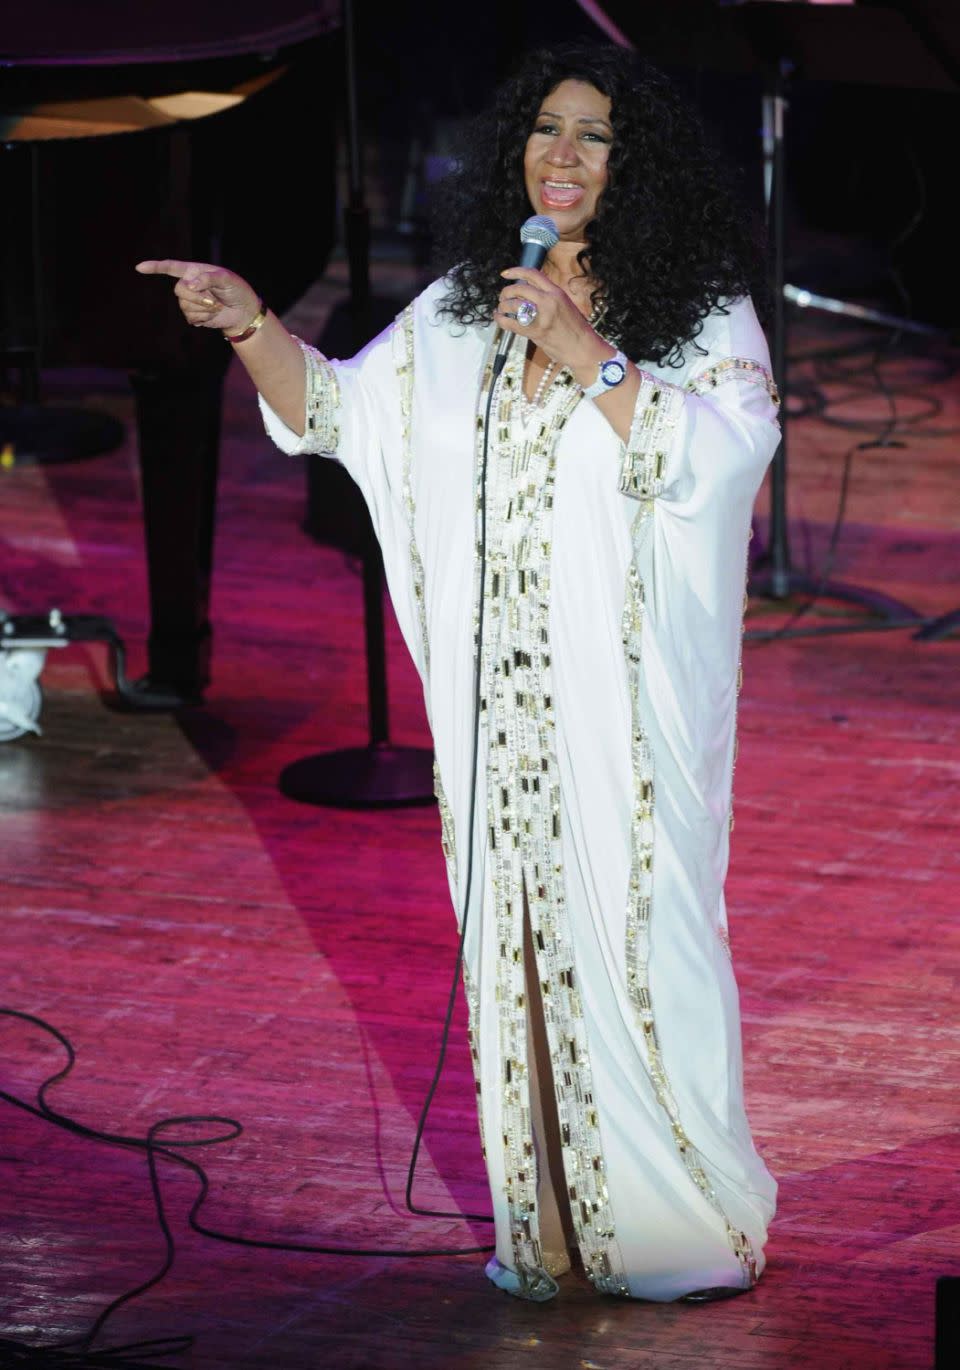 She was forced to deny she had pancreatic cancer six years ago after fake reports emerged. Aretha is here performing back in 2011. Source: Getty